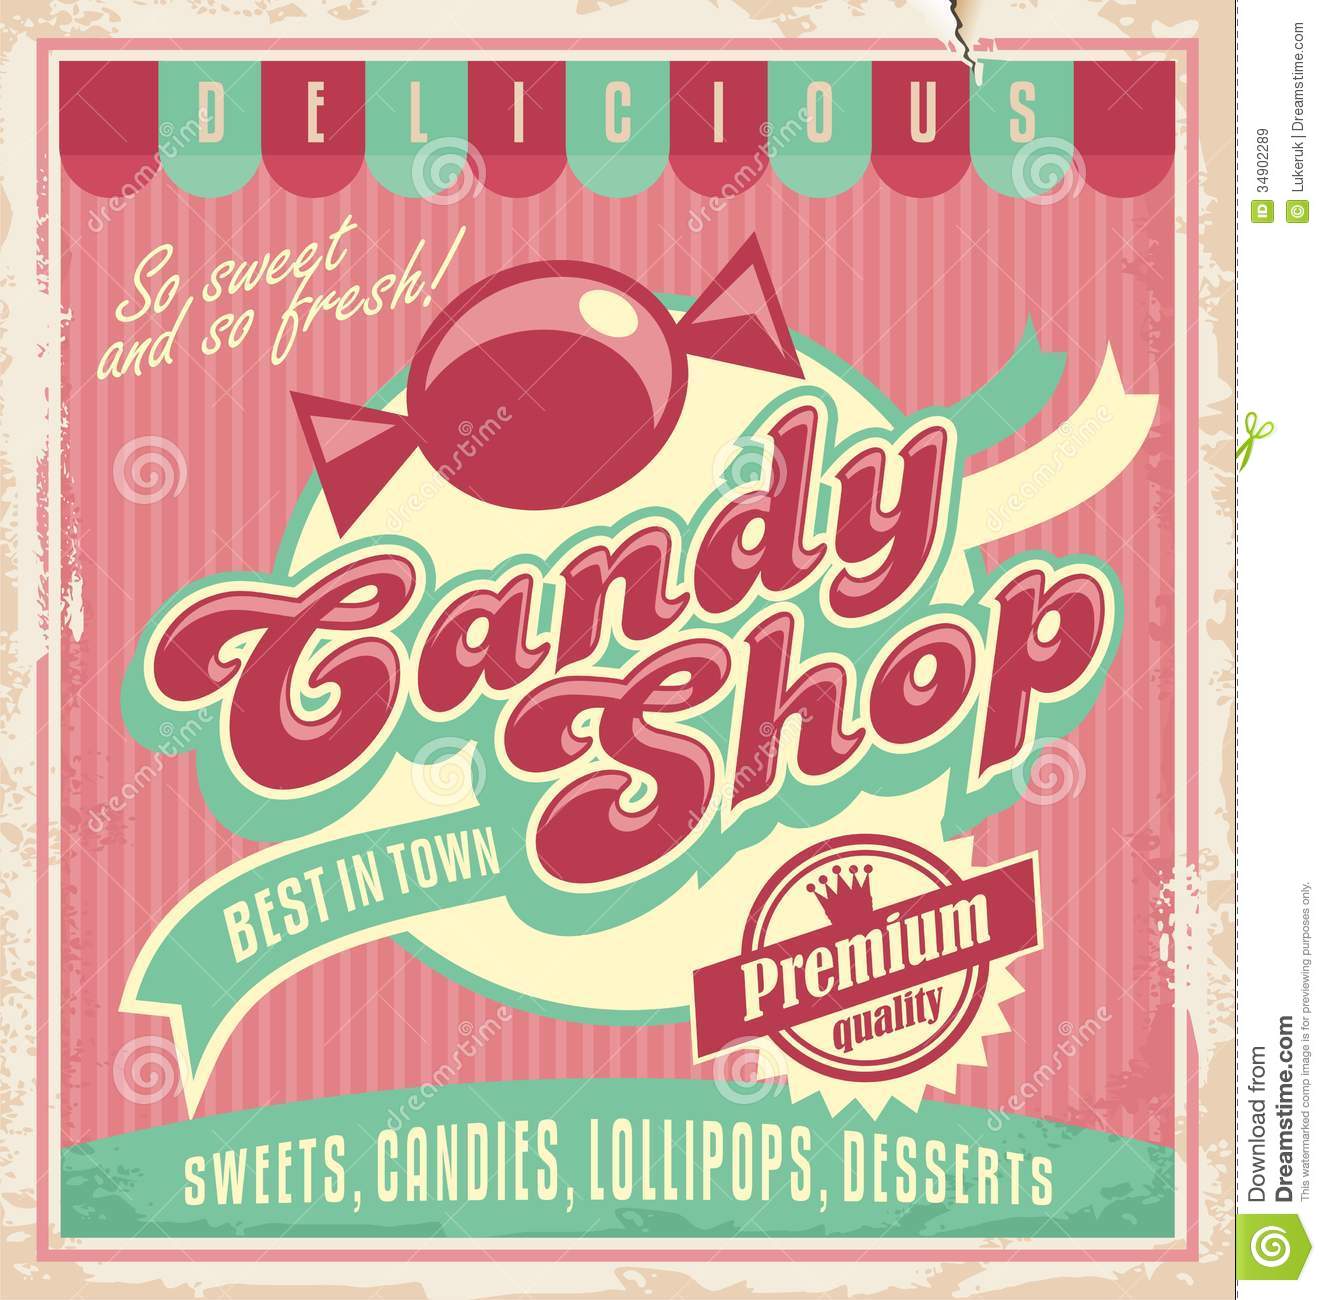 Vintage Store Signs Clipart Vintage Poster Template For